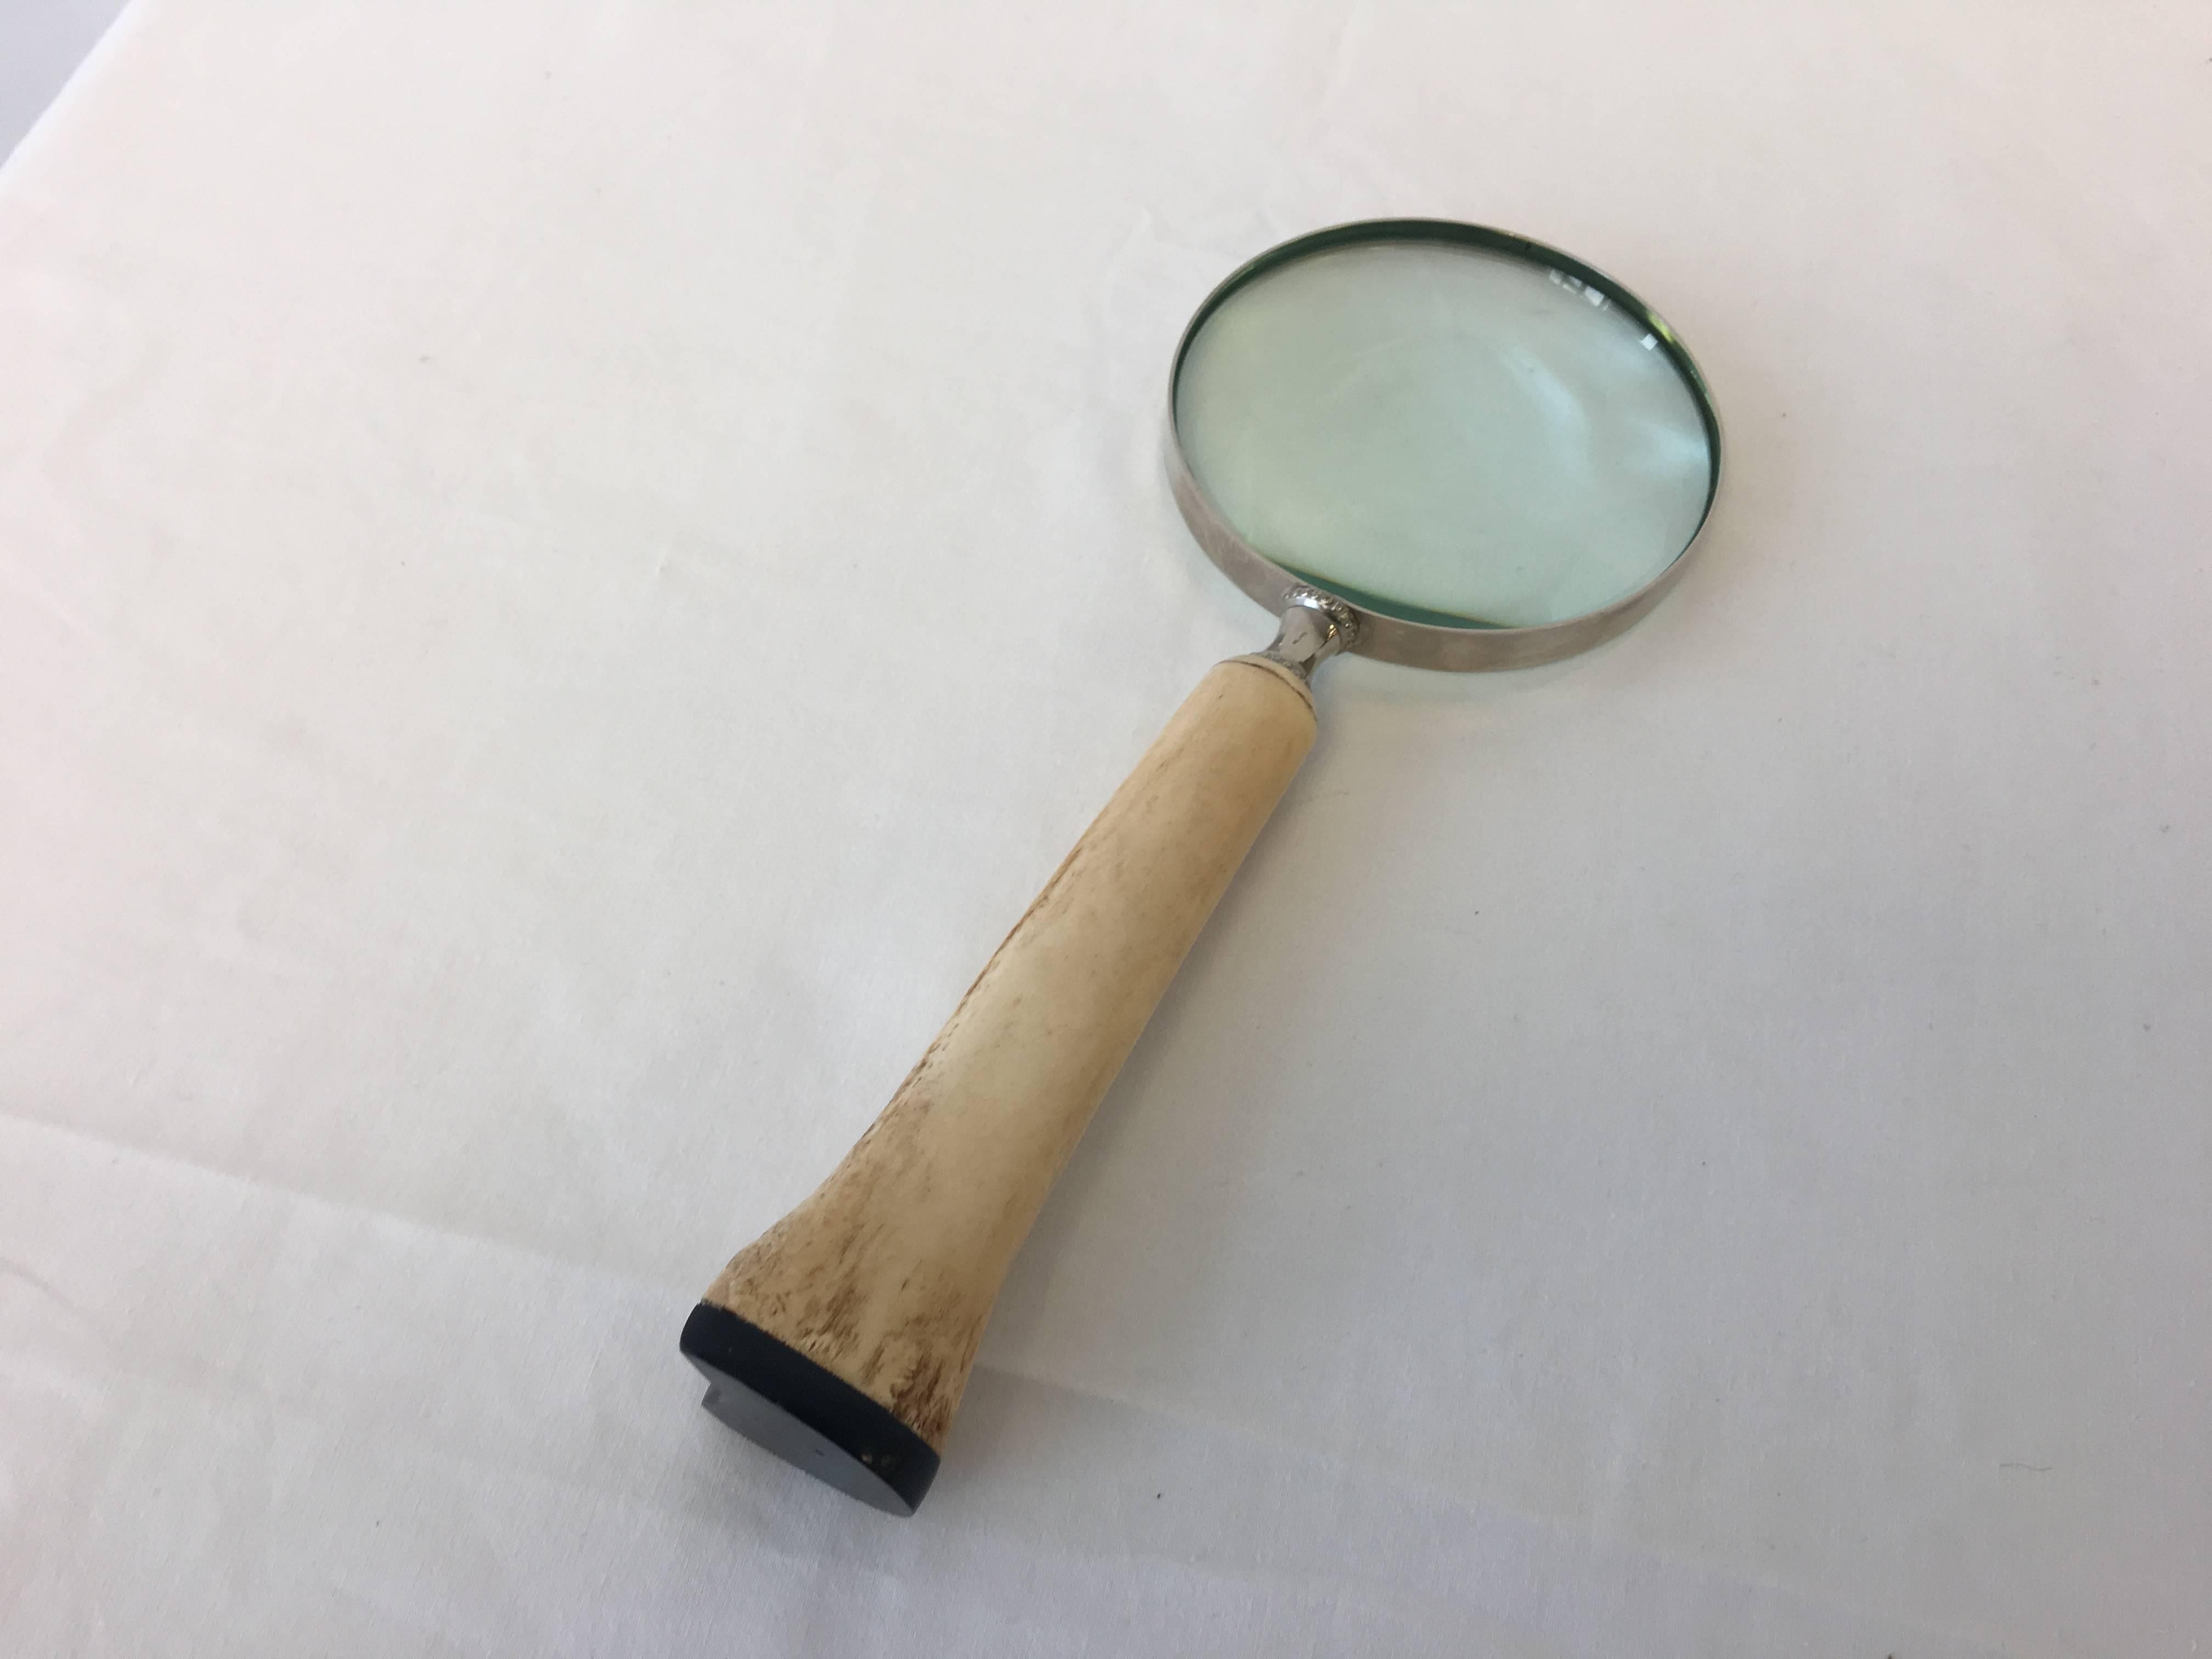 Offered is a stunning, white bone magnifying glass encased in sterling silver.